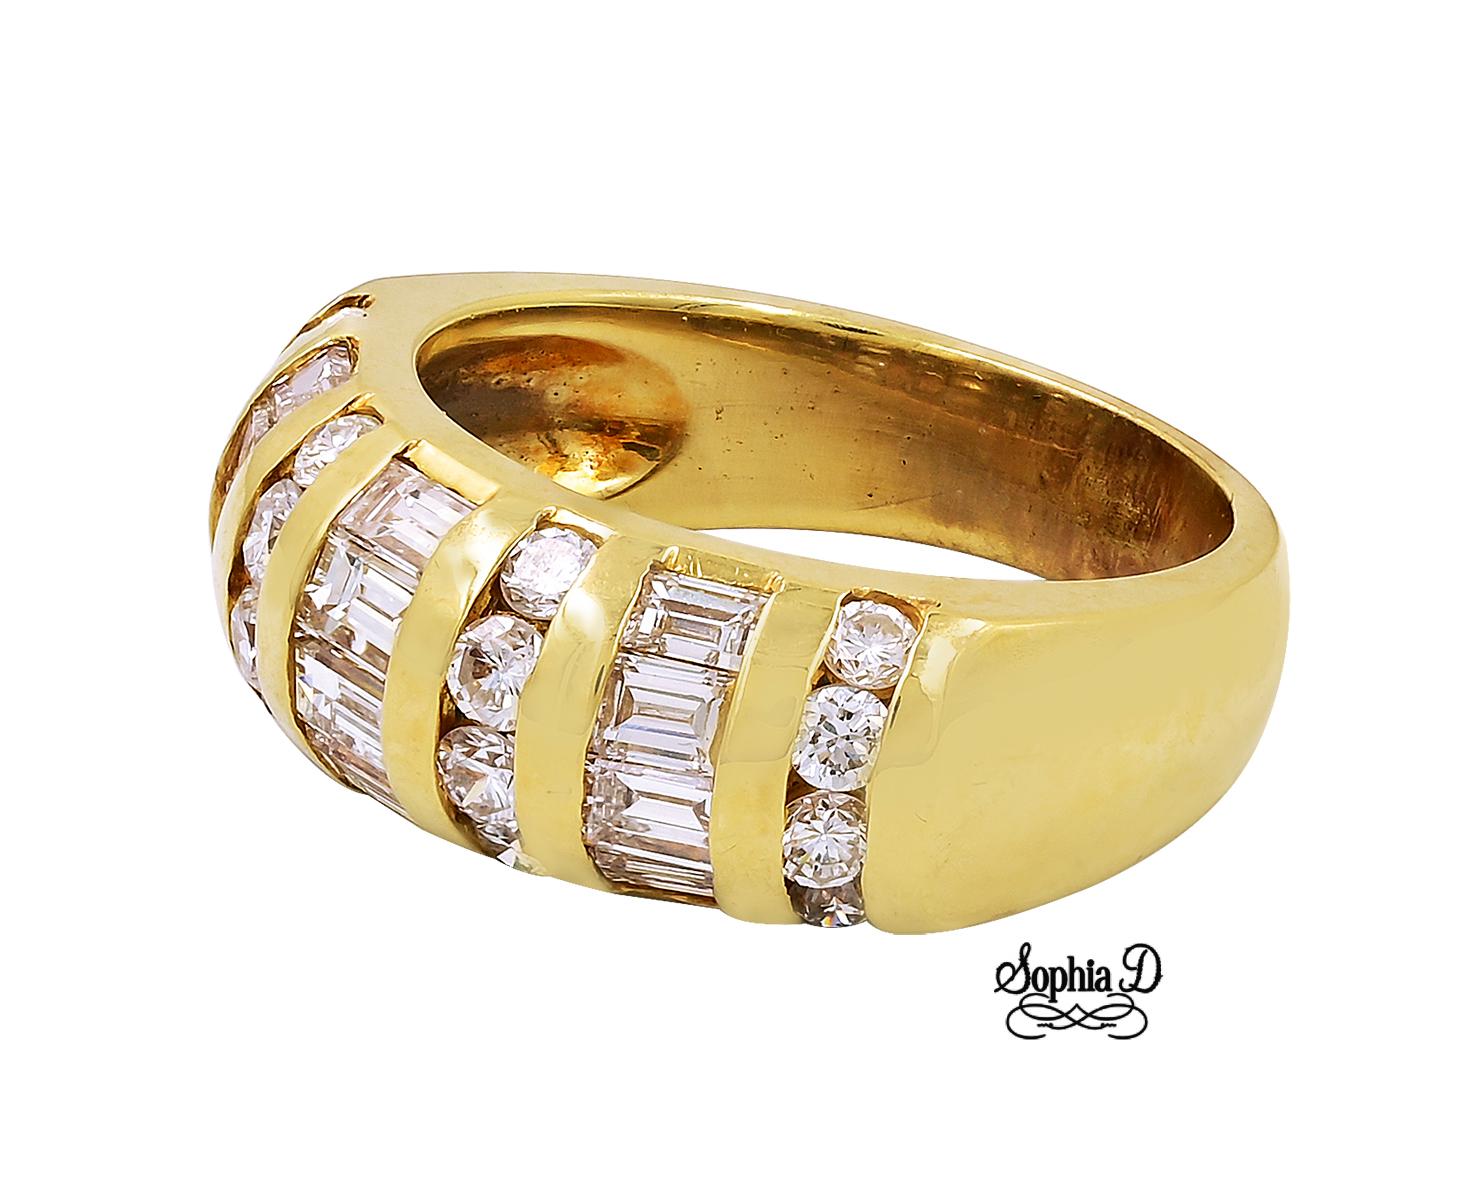 18K yellow gold ring with round diamonds and emerald cut diamonds.

Sophia D by Joseph Dardashti LTD has been known worldwide for 35 years and are inspired by classic Art Deco design that merges with modern manufacturing techniques.  